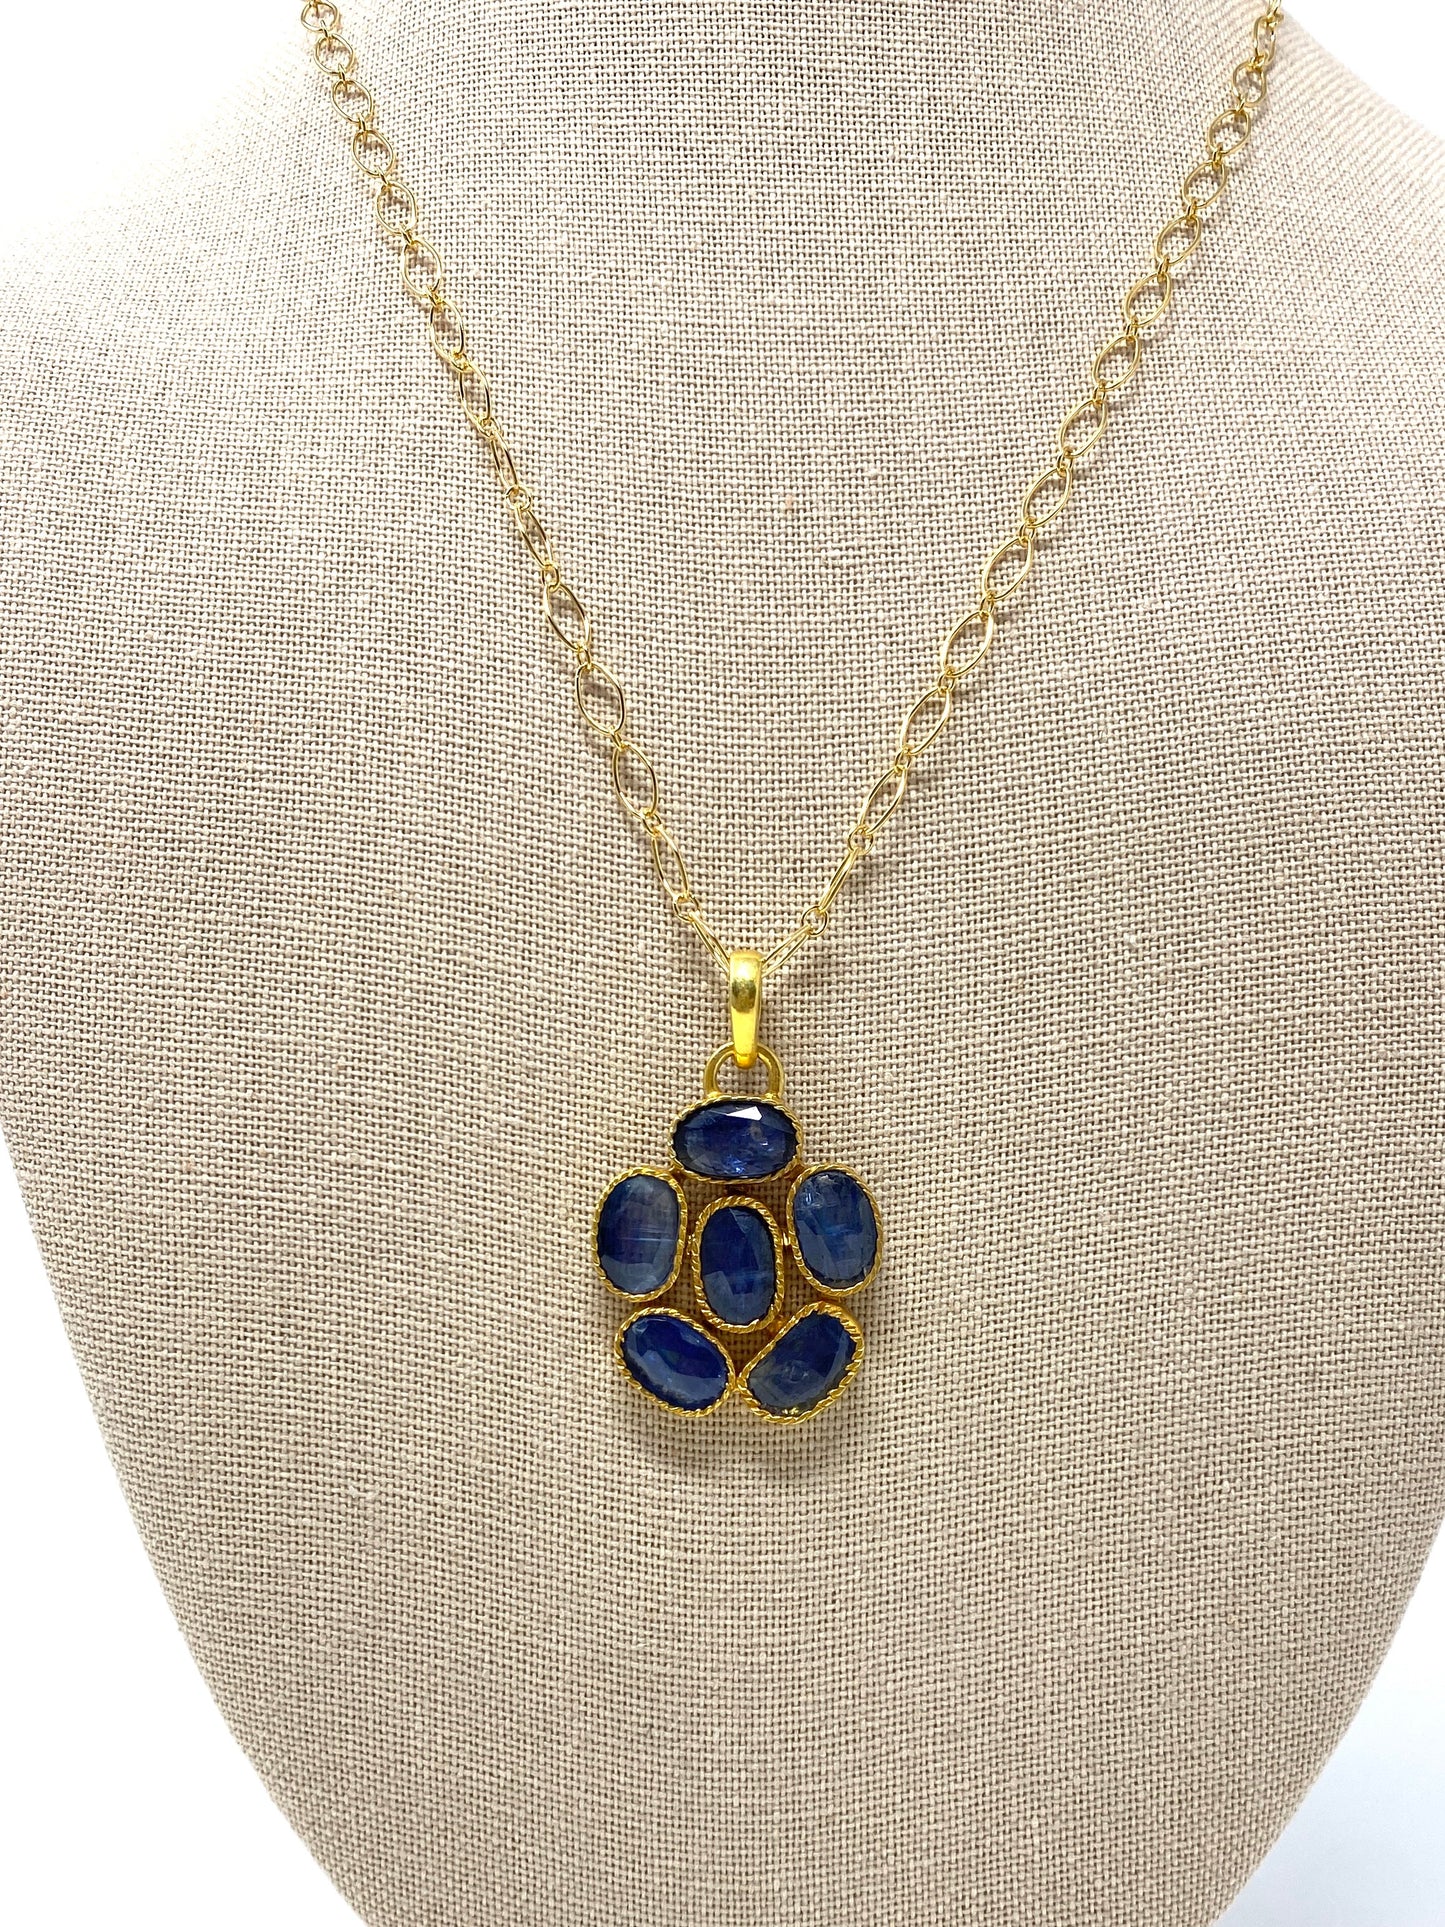 Gold Filled Chain Necklace With Sapphire Pendant